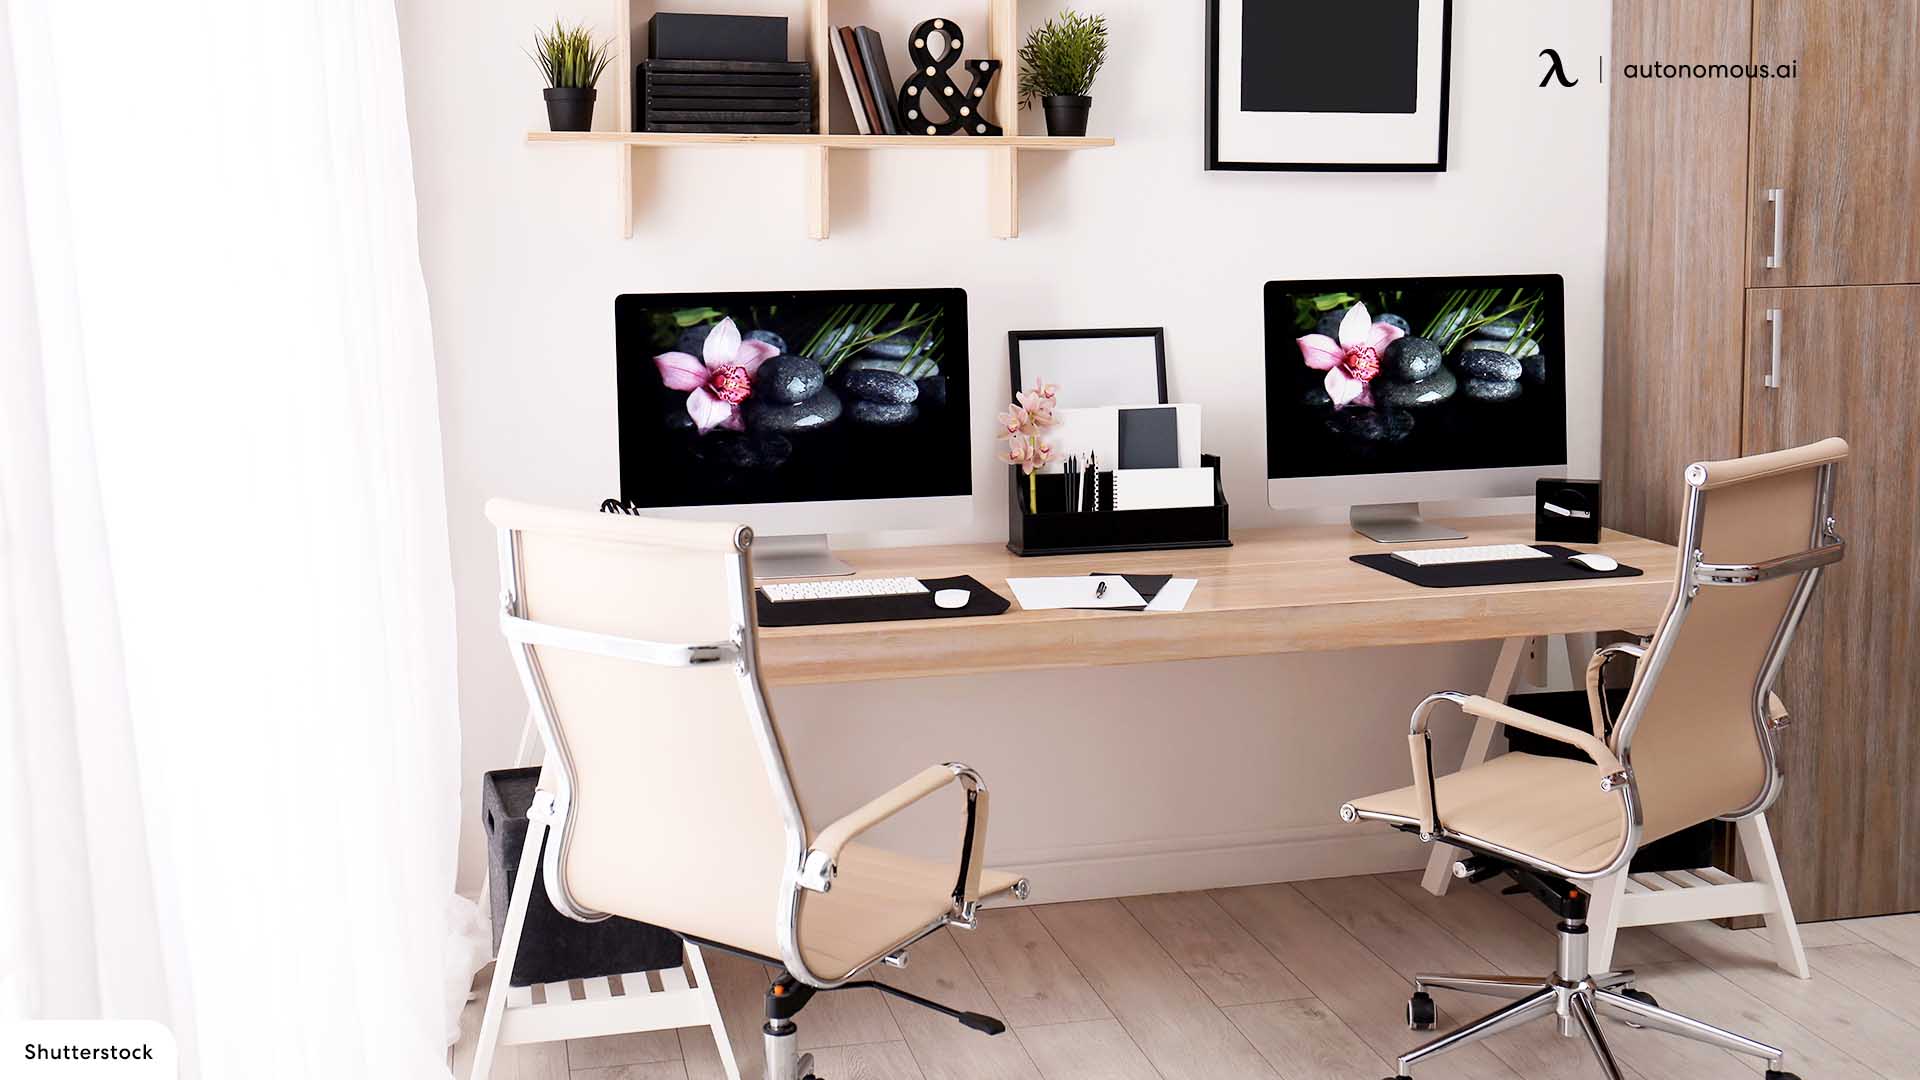 Distraction limits in home office for two